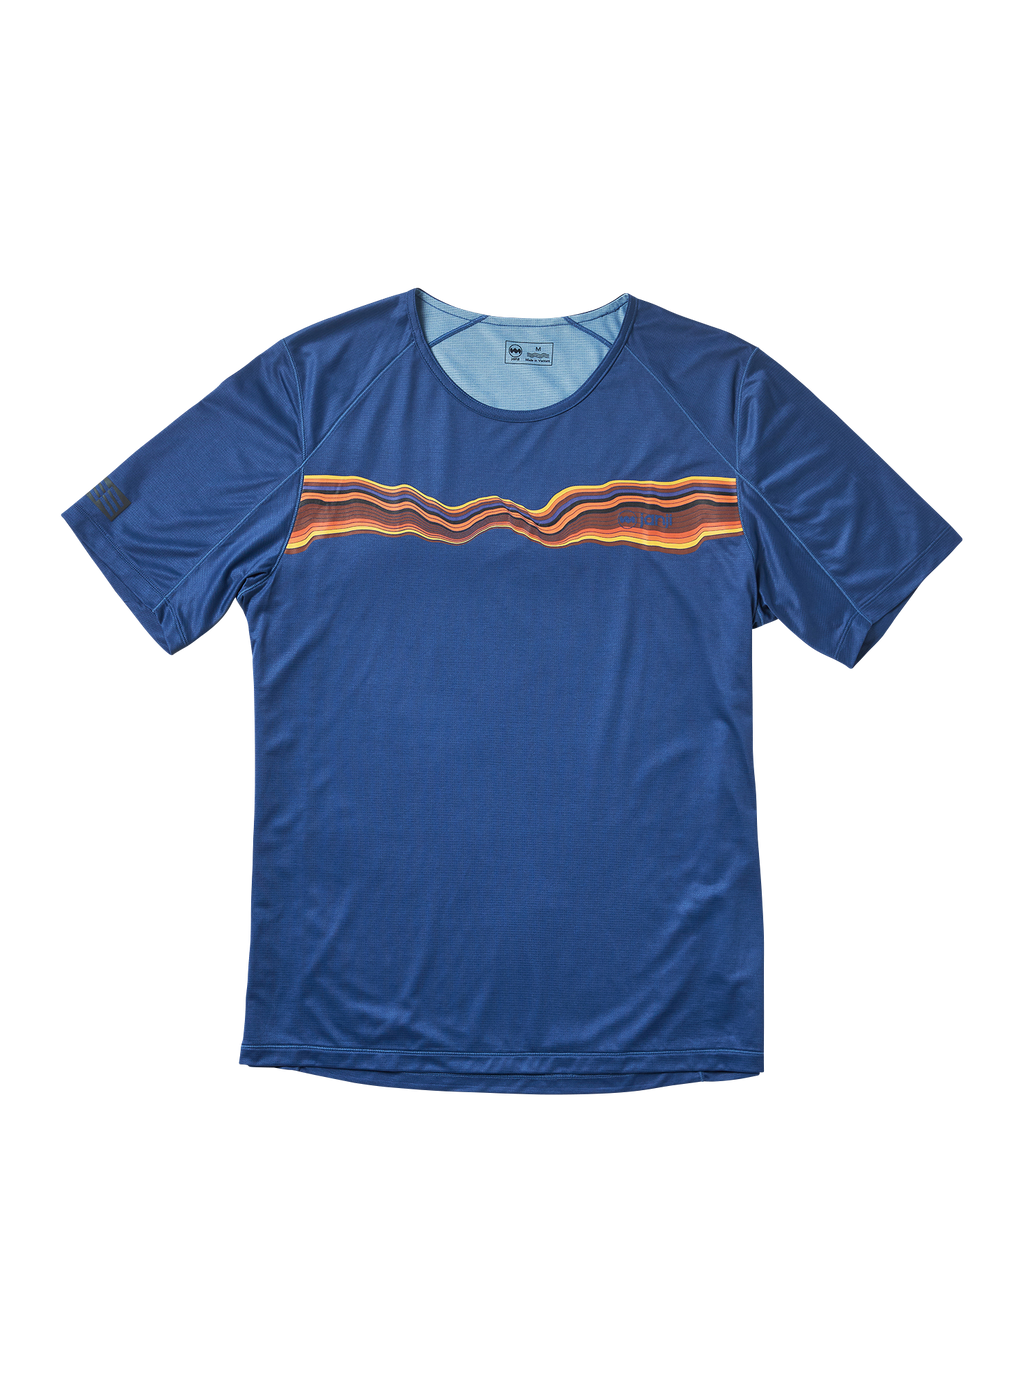 Run All Day Tee in Eclipse Tectonic Shift (Small)